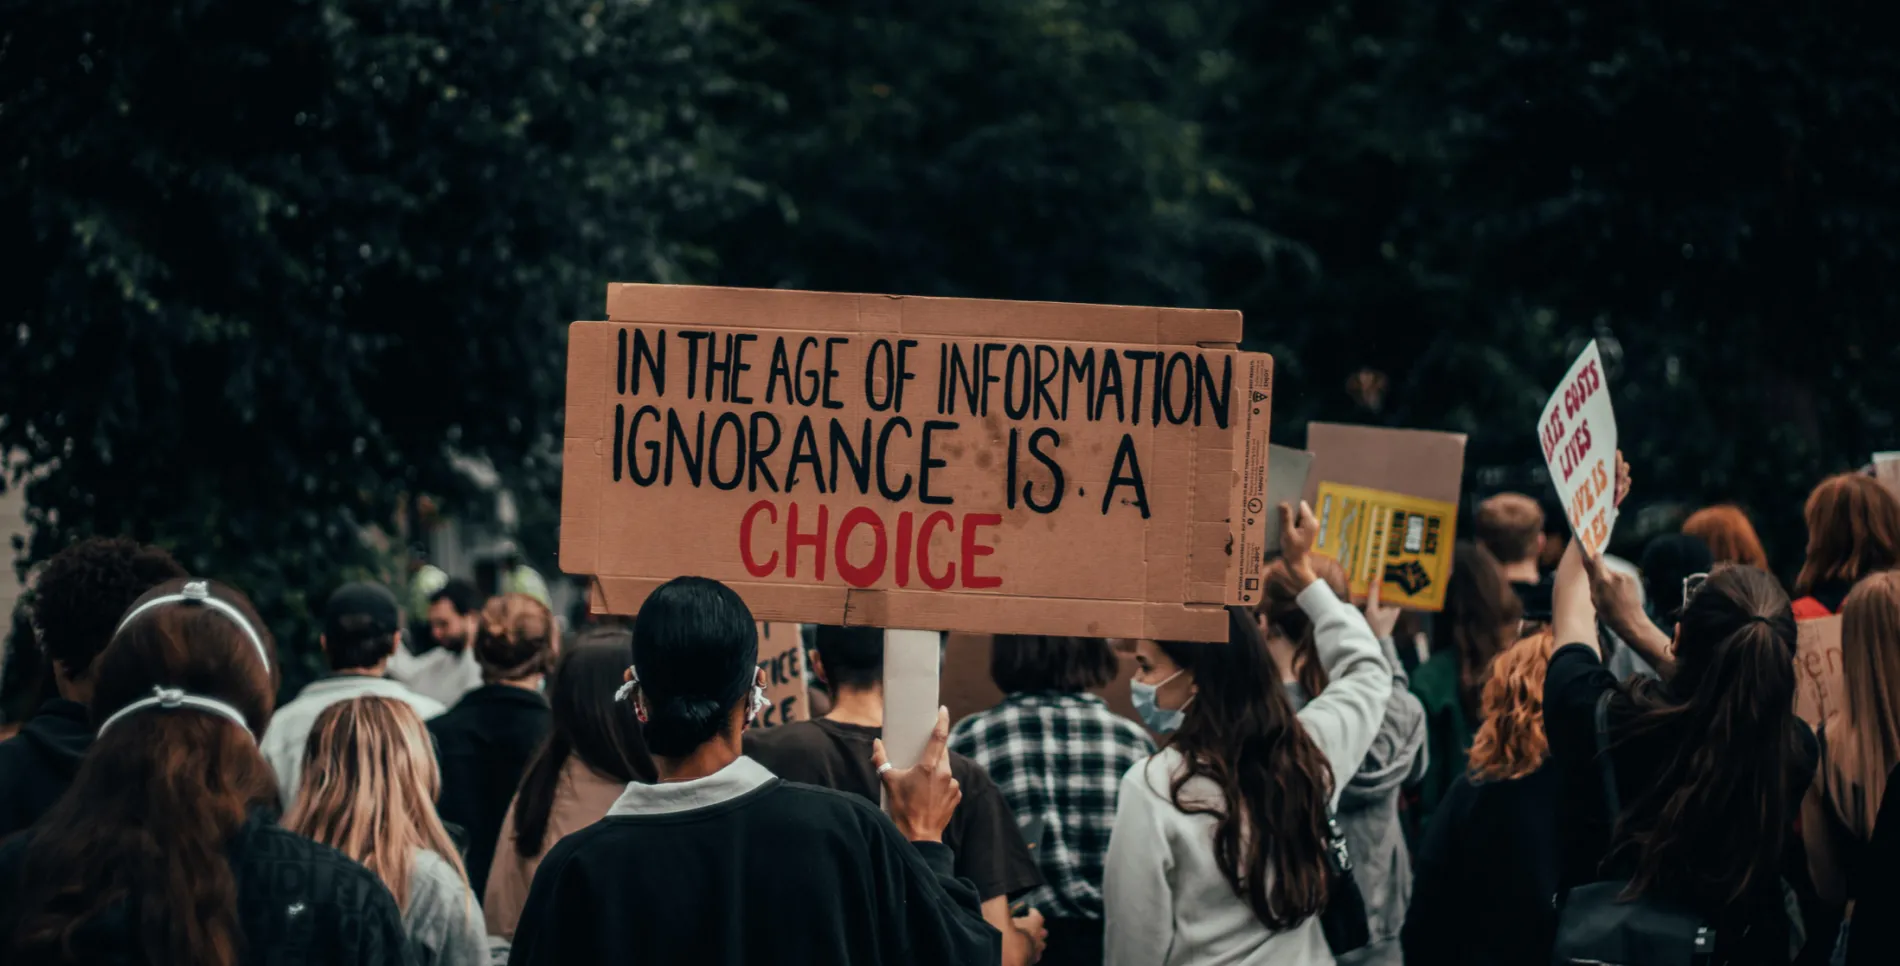 People protesting, holding a sign saying "In the age of information, ignorance is a choice"